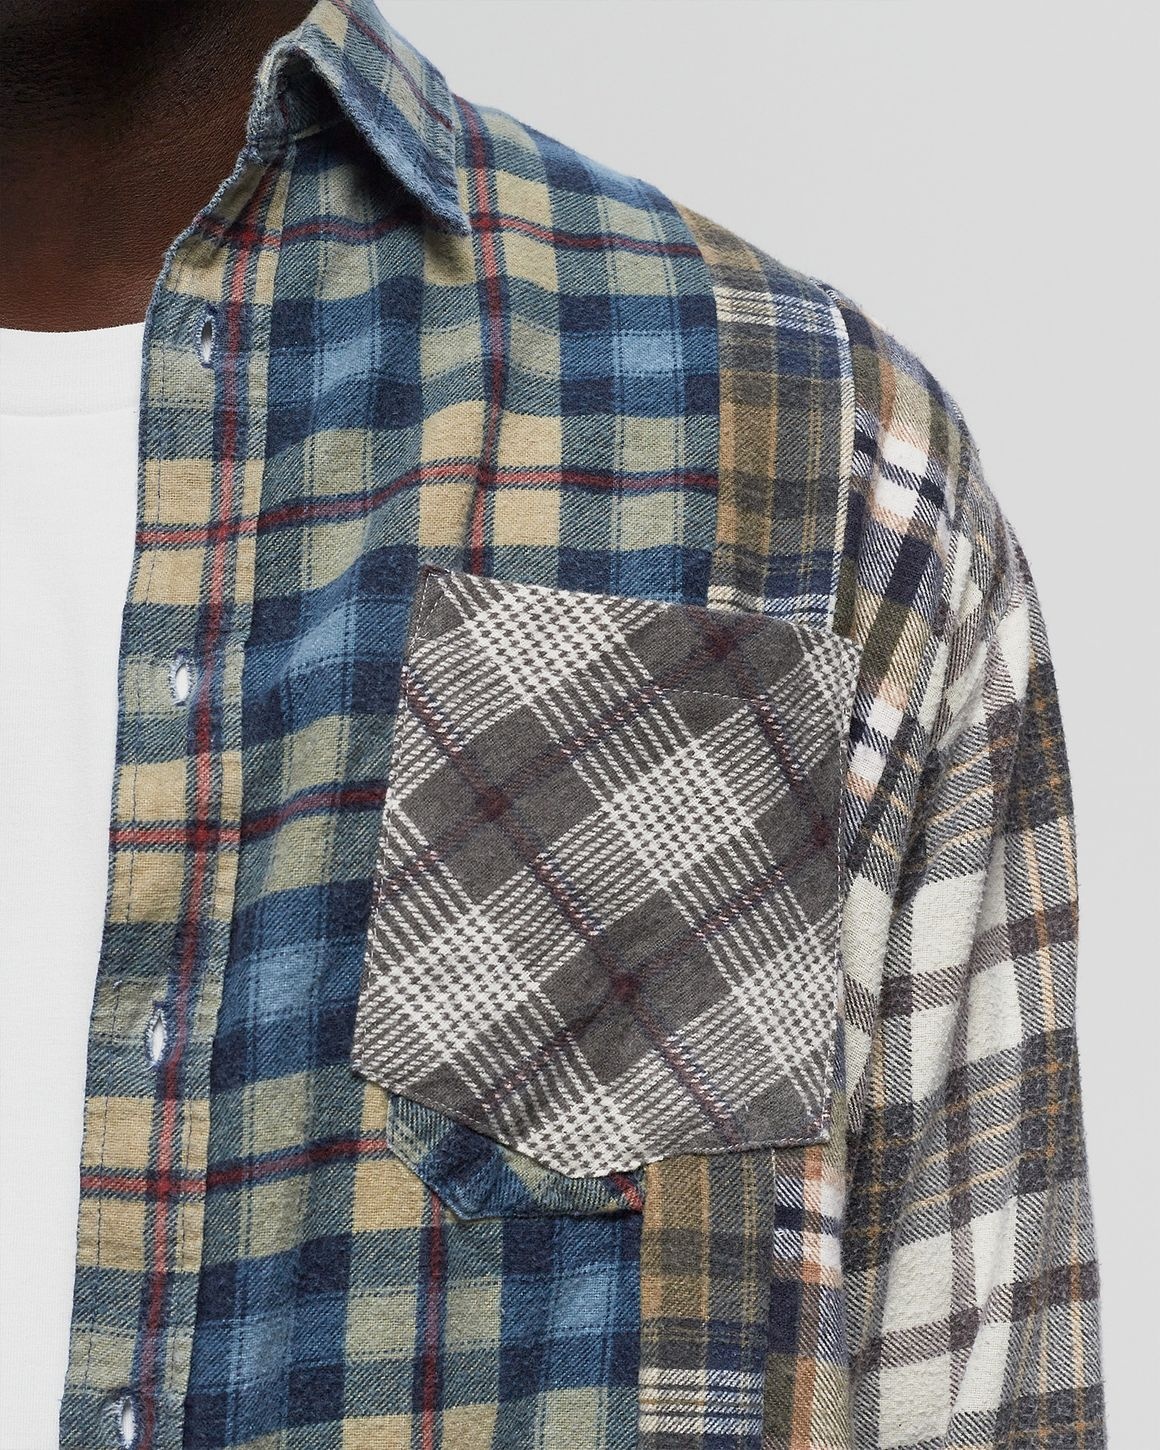 Rebuild by Flannel Shirt - 7